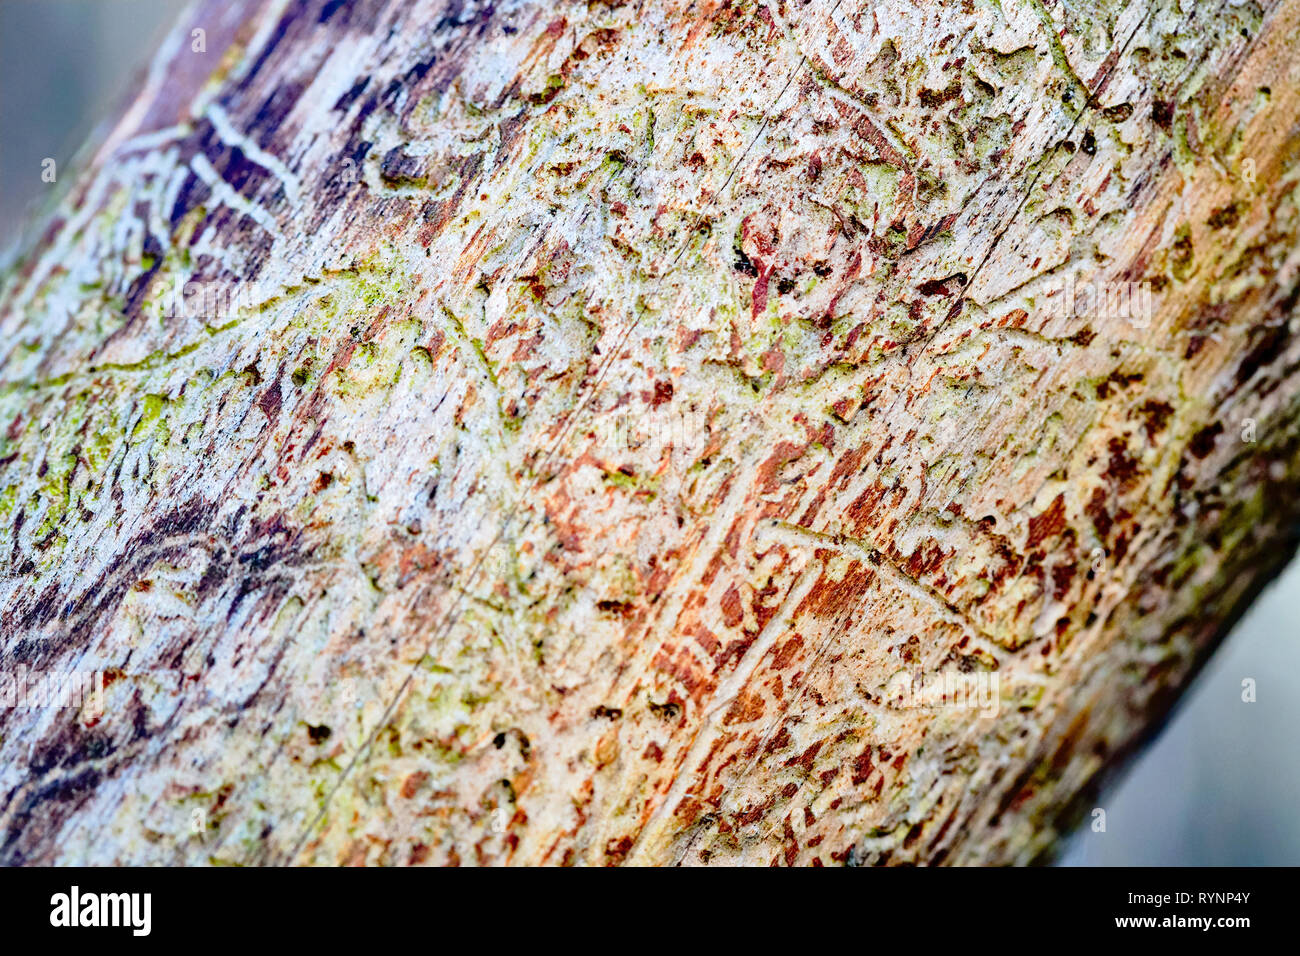 Pine tree wood eroded in wormholes suffers from bark beetle infection diagonally on out of focus blurred background. Stock Photo